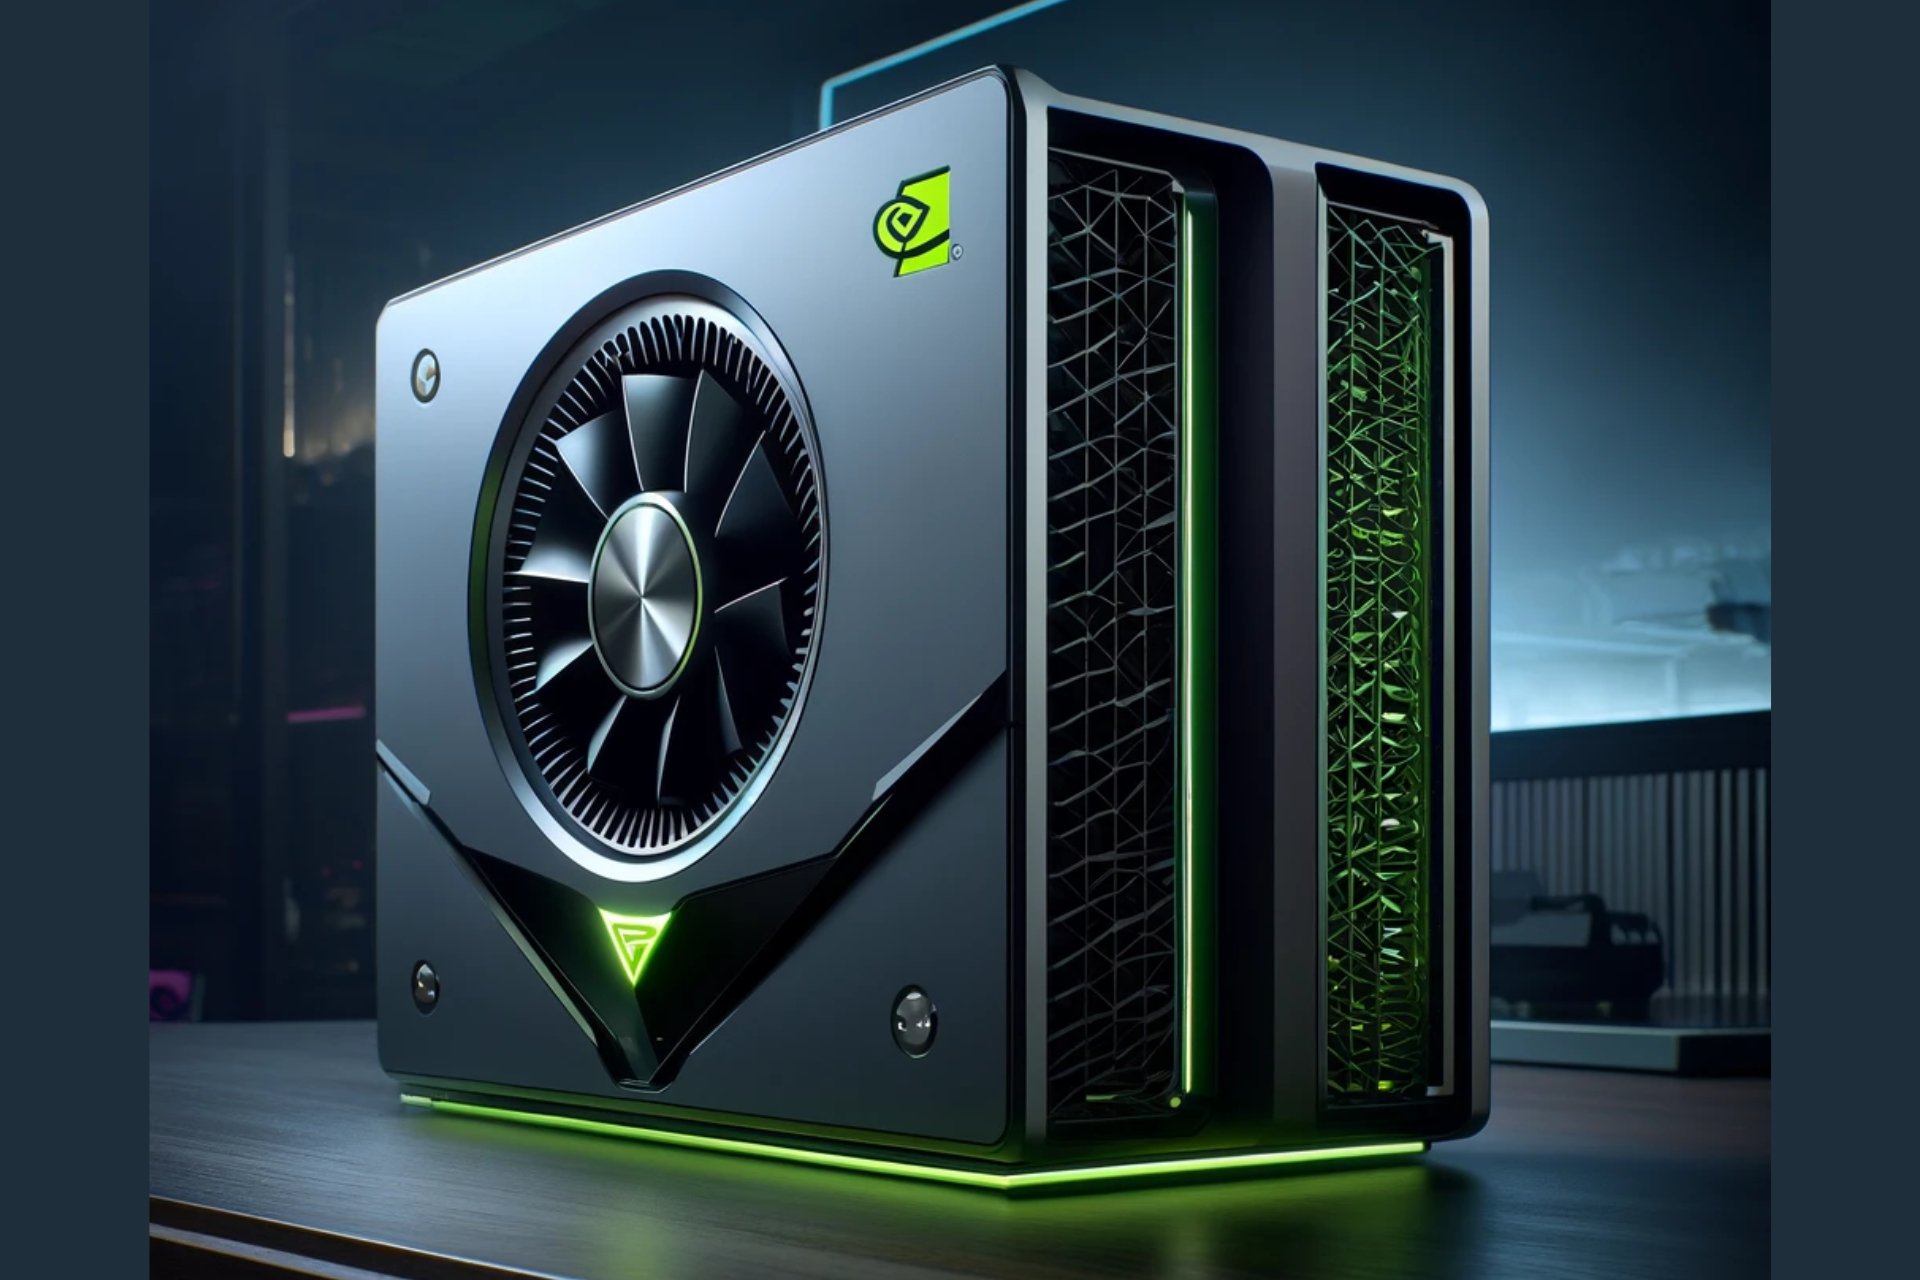 Is NVIDIA working on a gaming console? The new SFF ecosystem might lead to that